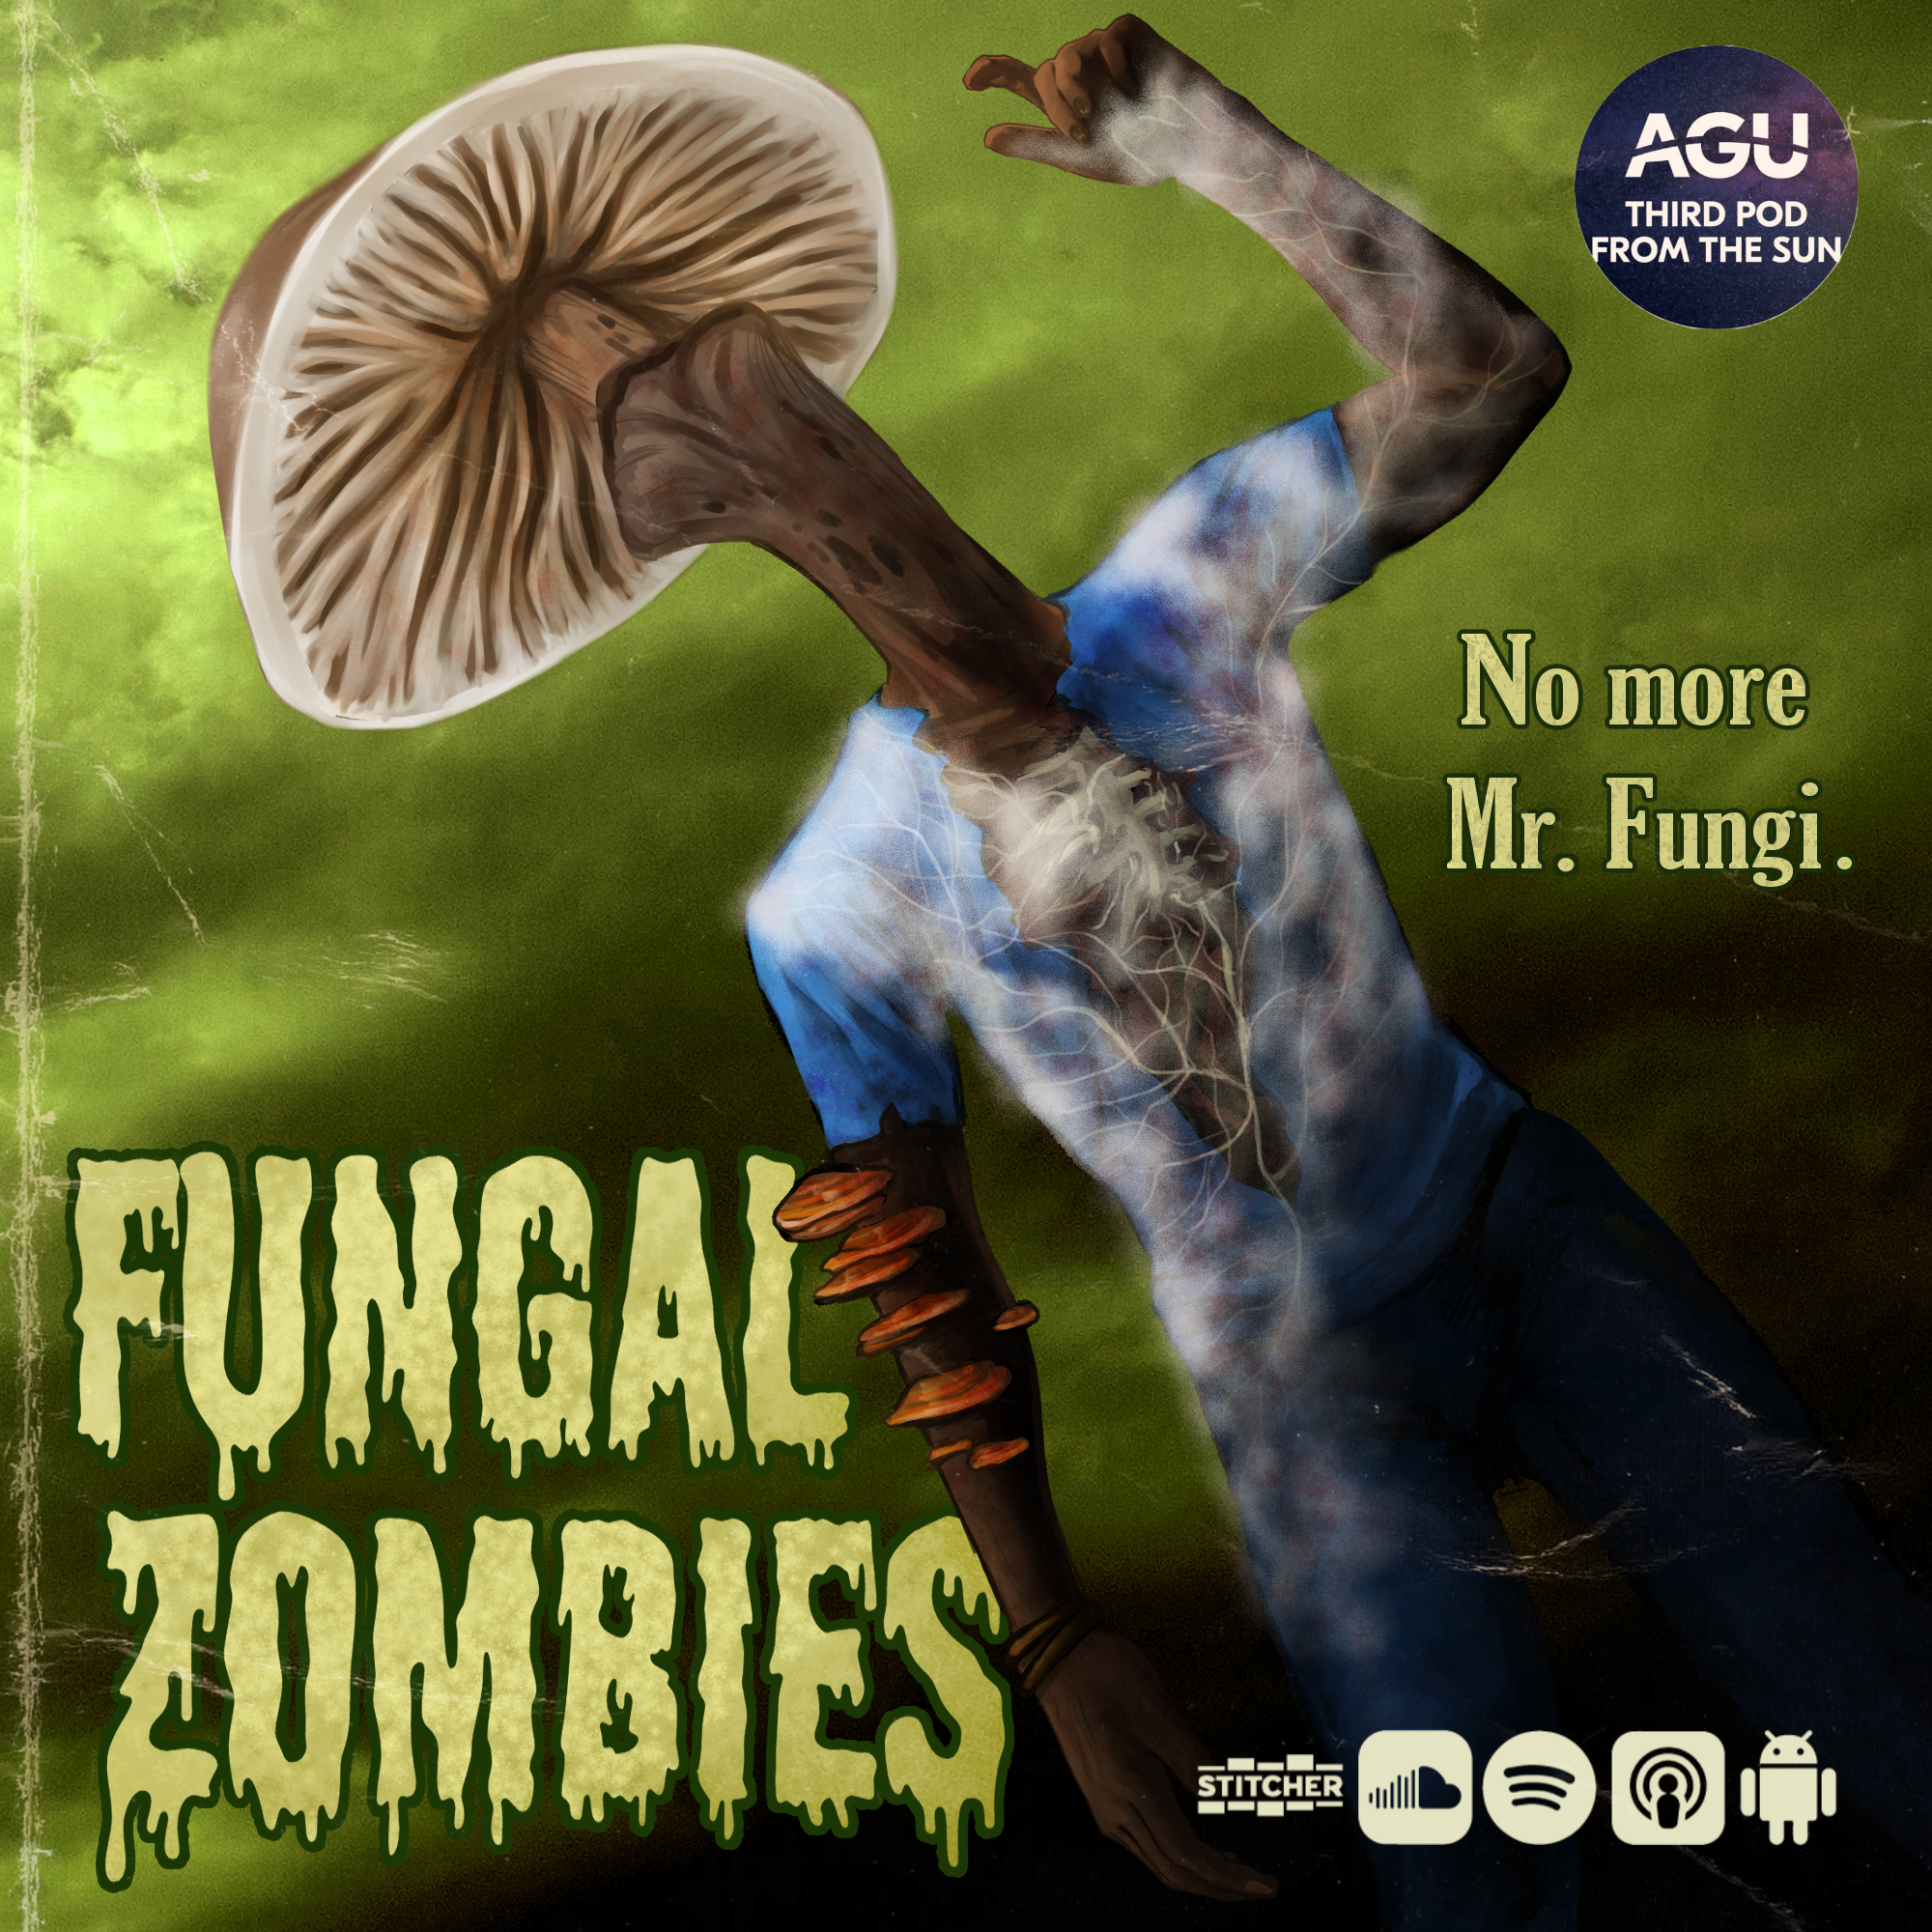 in the episode fungus among us, doesn't that sound like among us